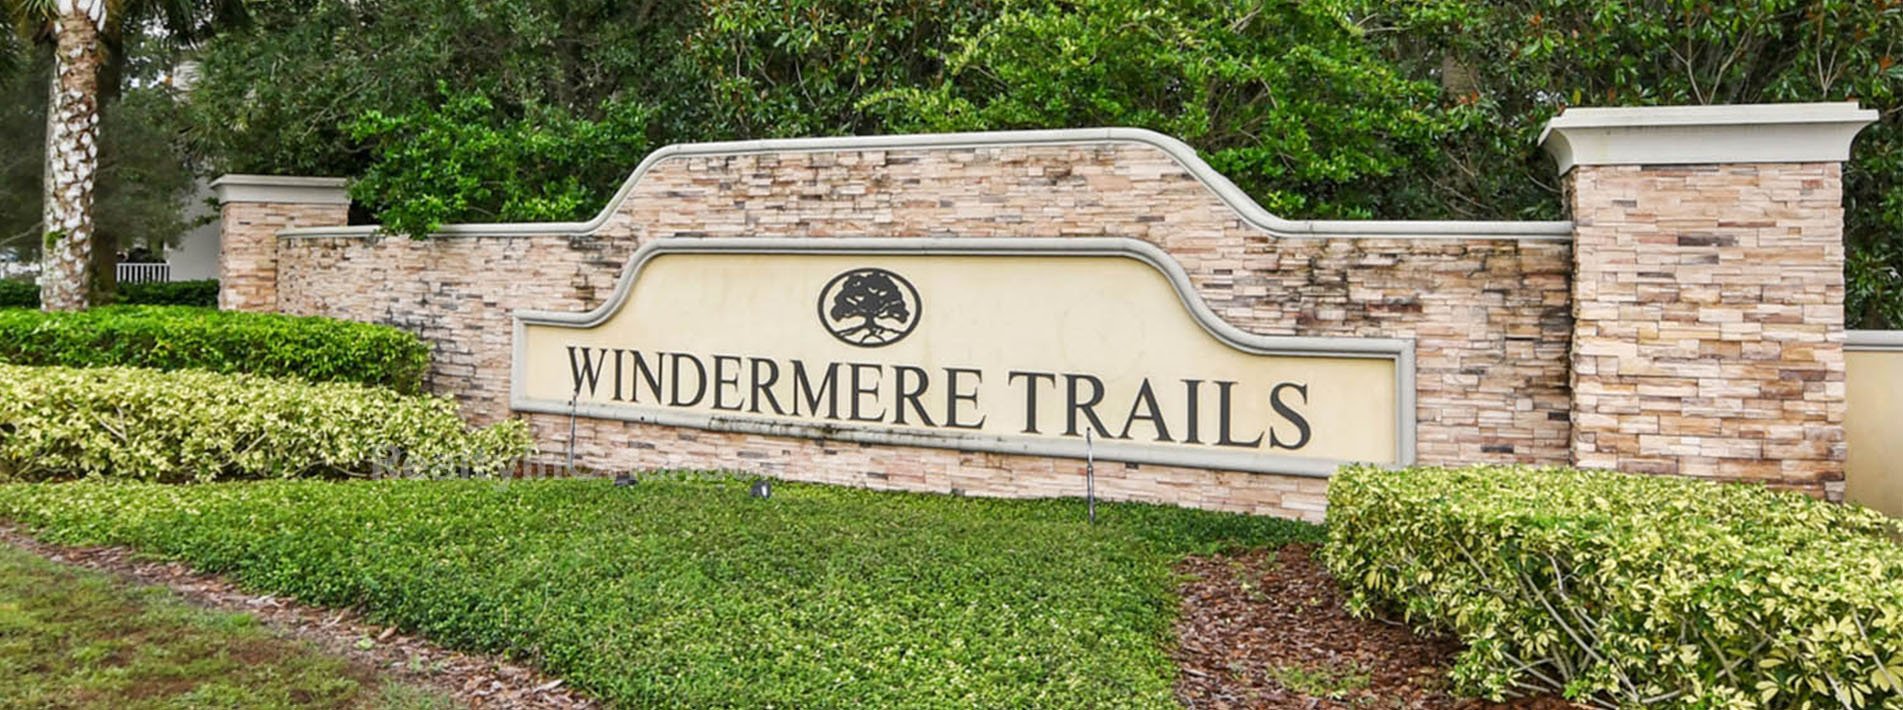 Windermere Trails - Pool Party